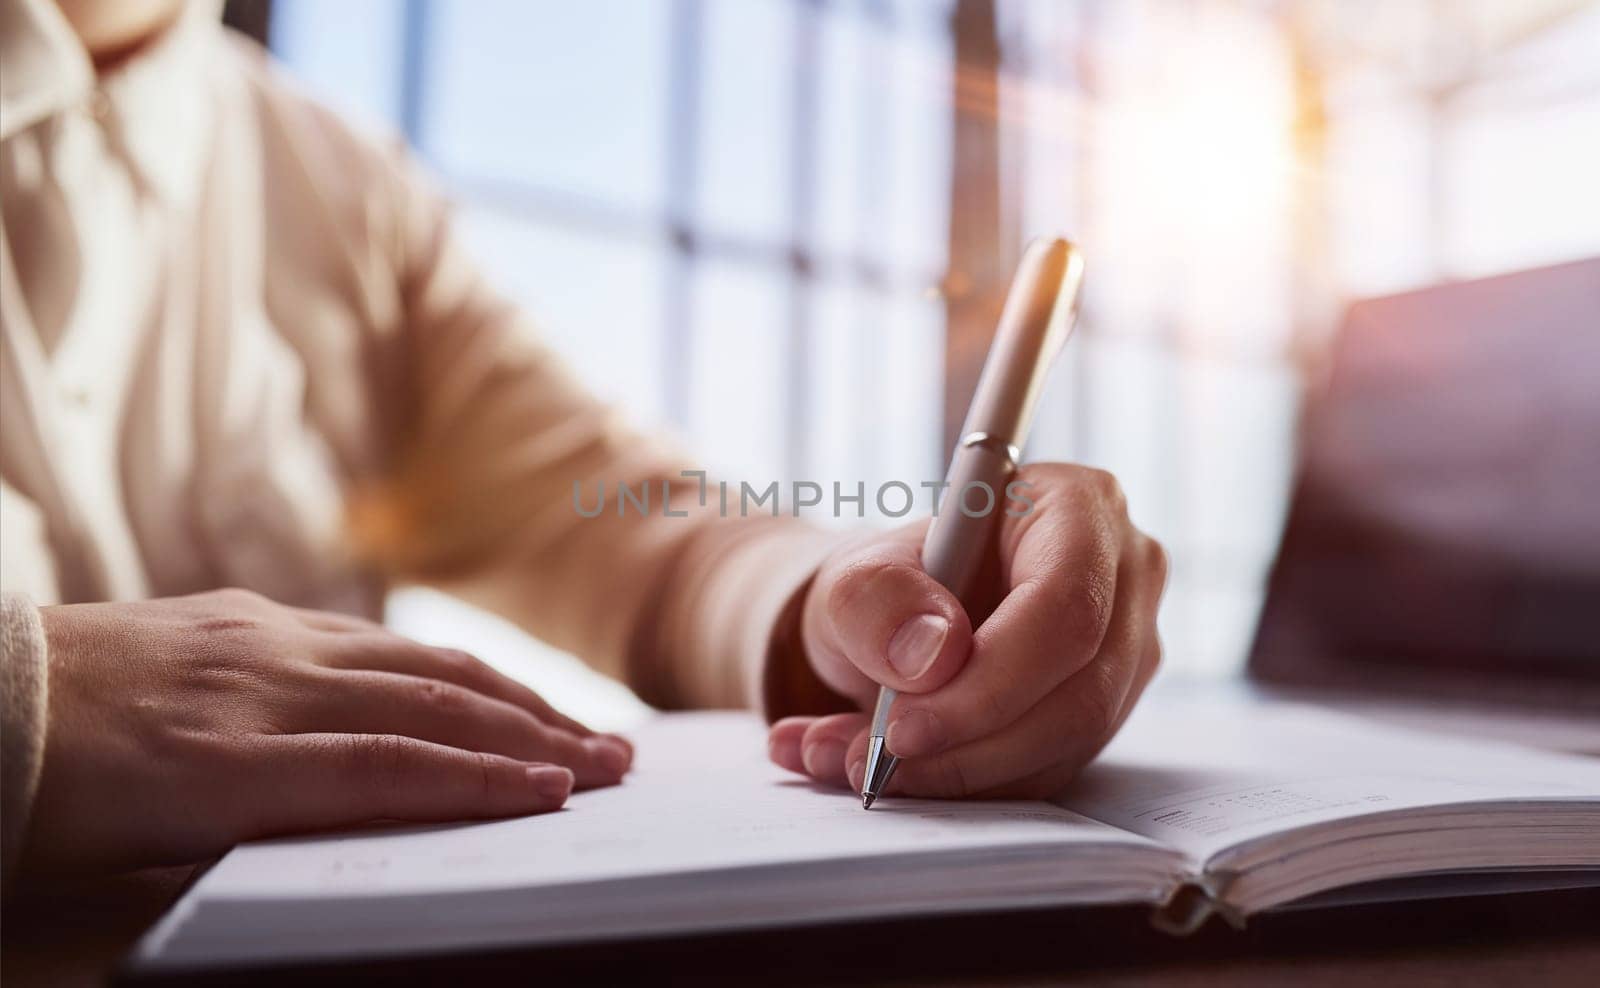 Businessman writes with a pen in diary in a sunny office, business and education concept. Close up